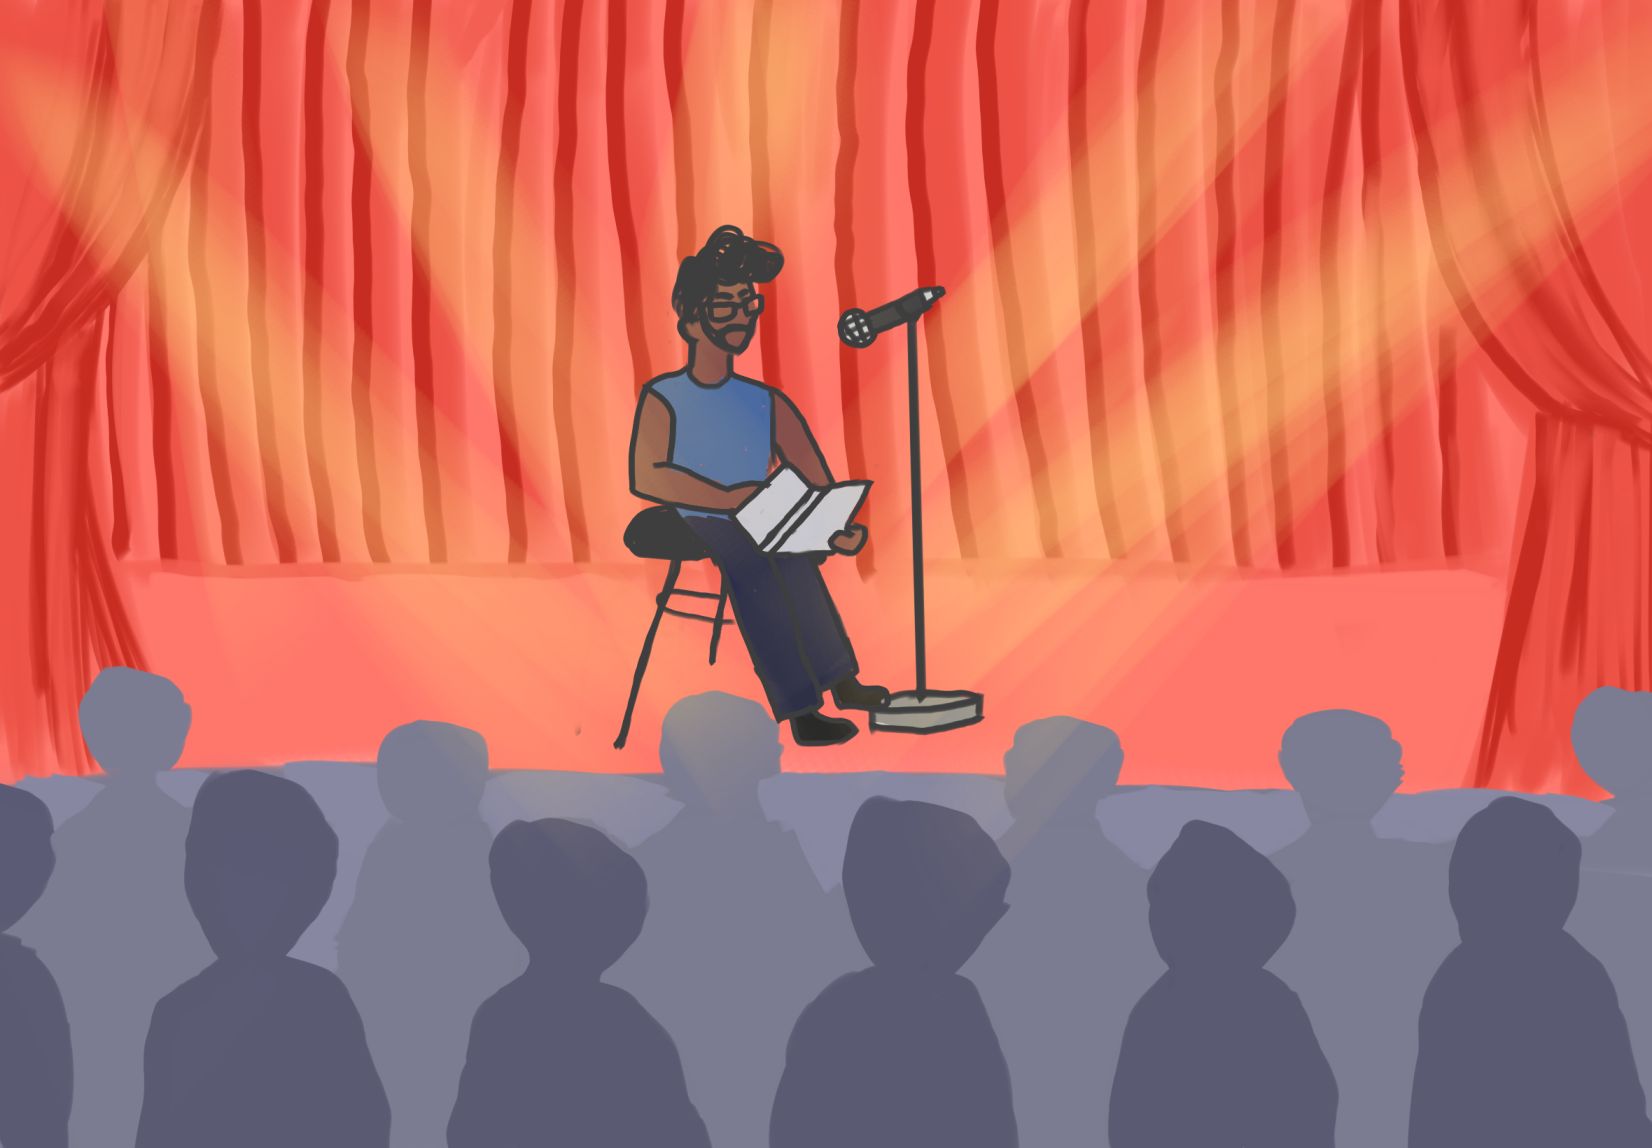 An illustration of a person sitting down in front of a mic and a red curtain backdrop on a stage in front of an audience.